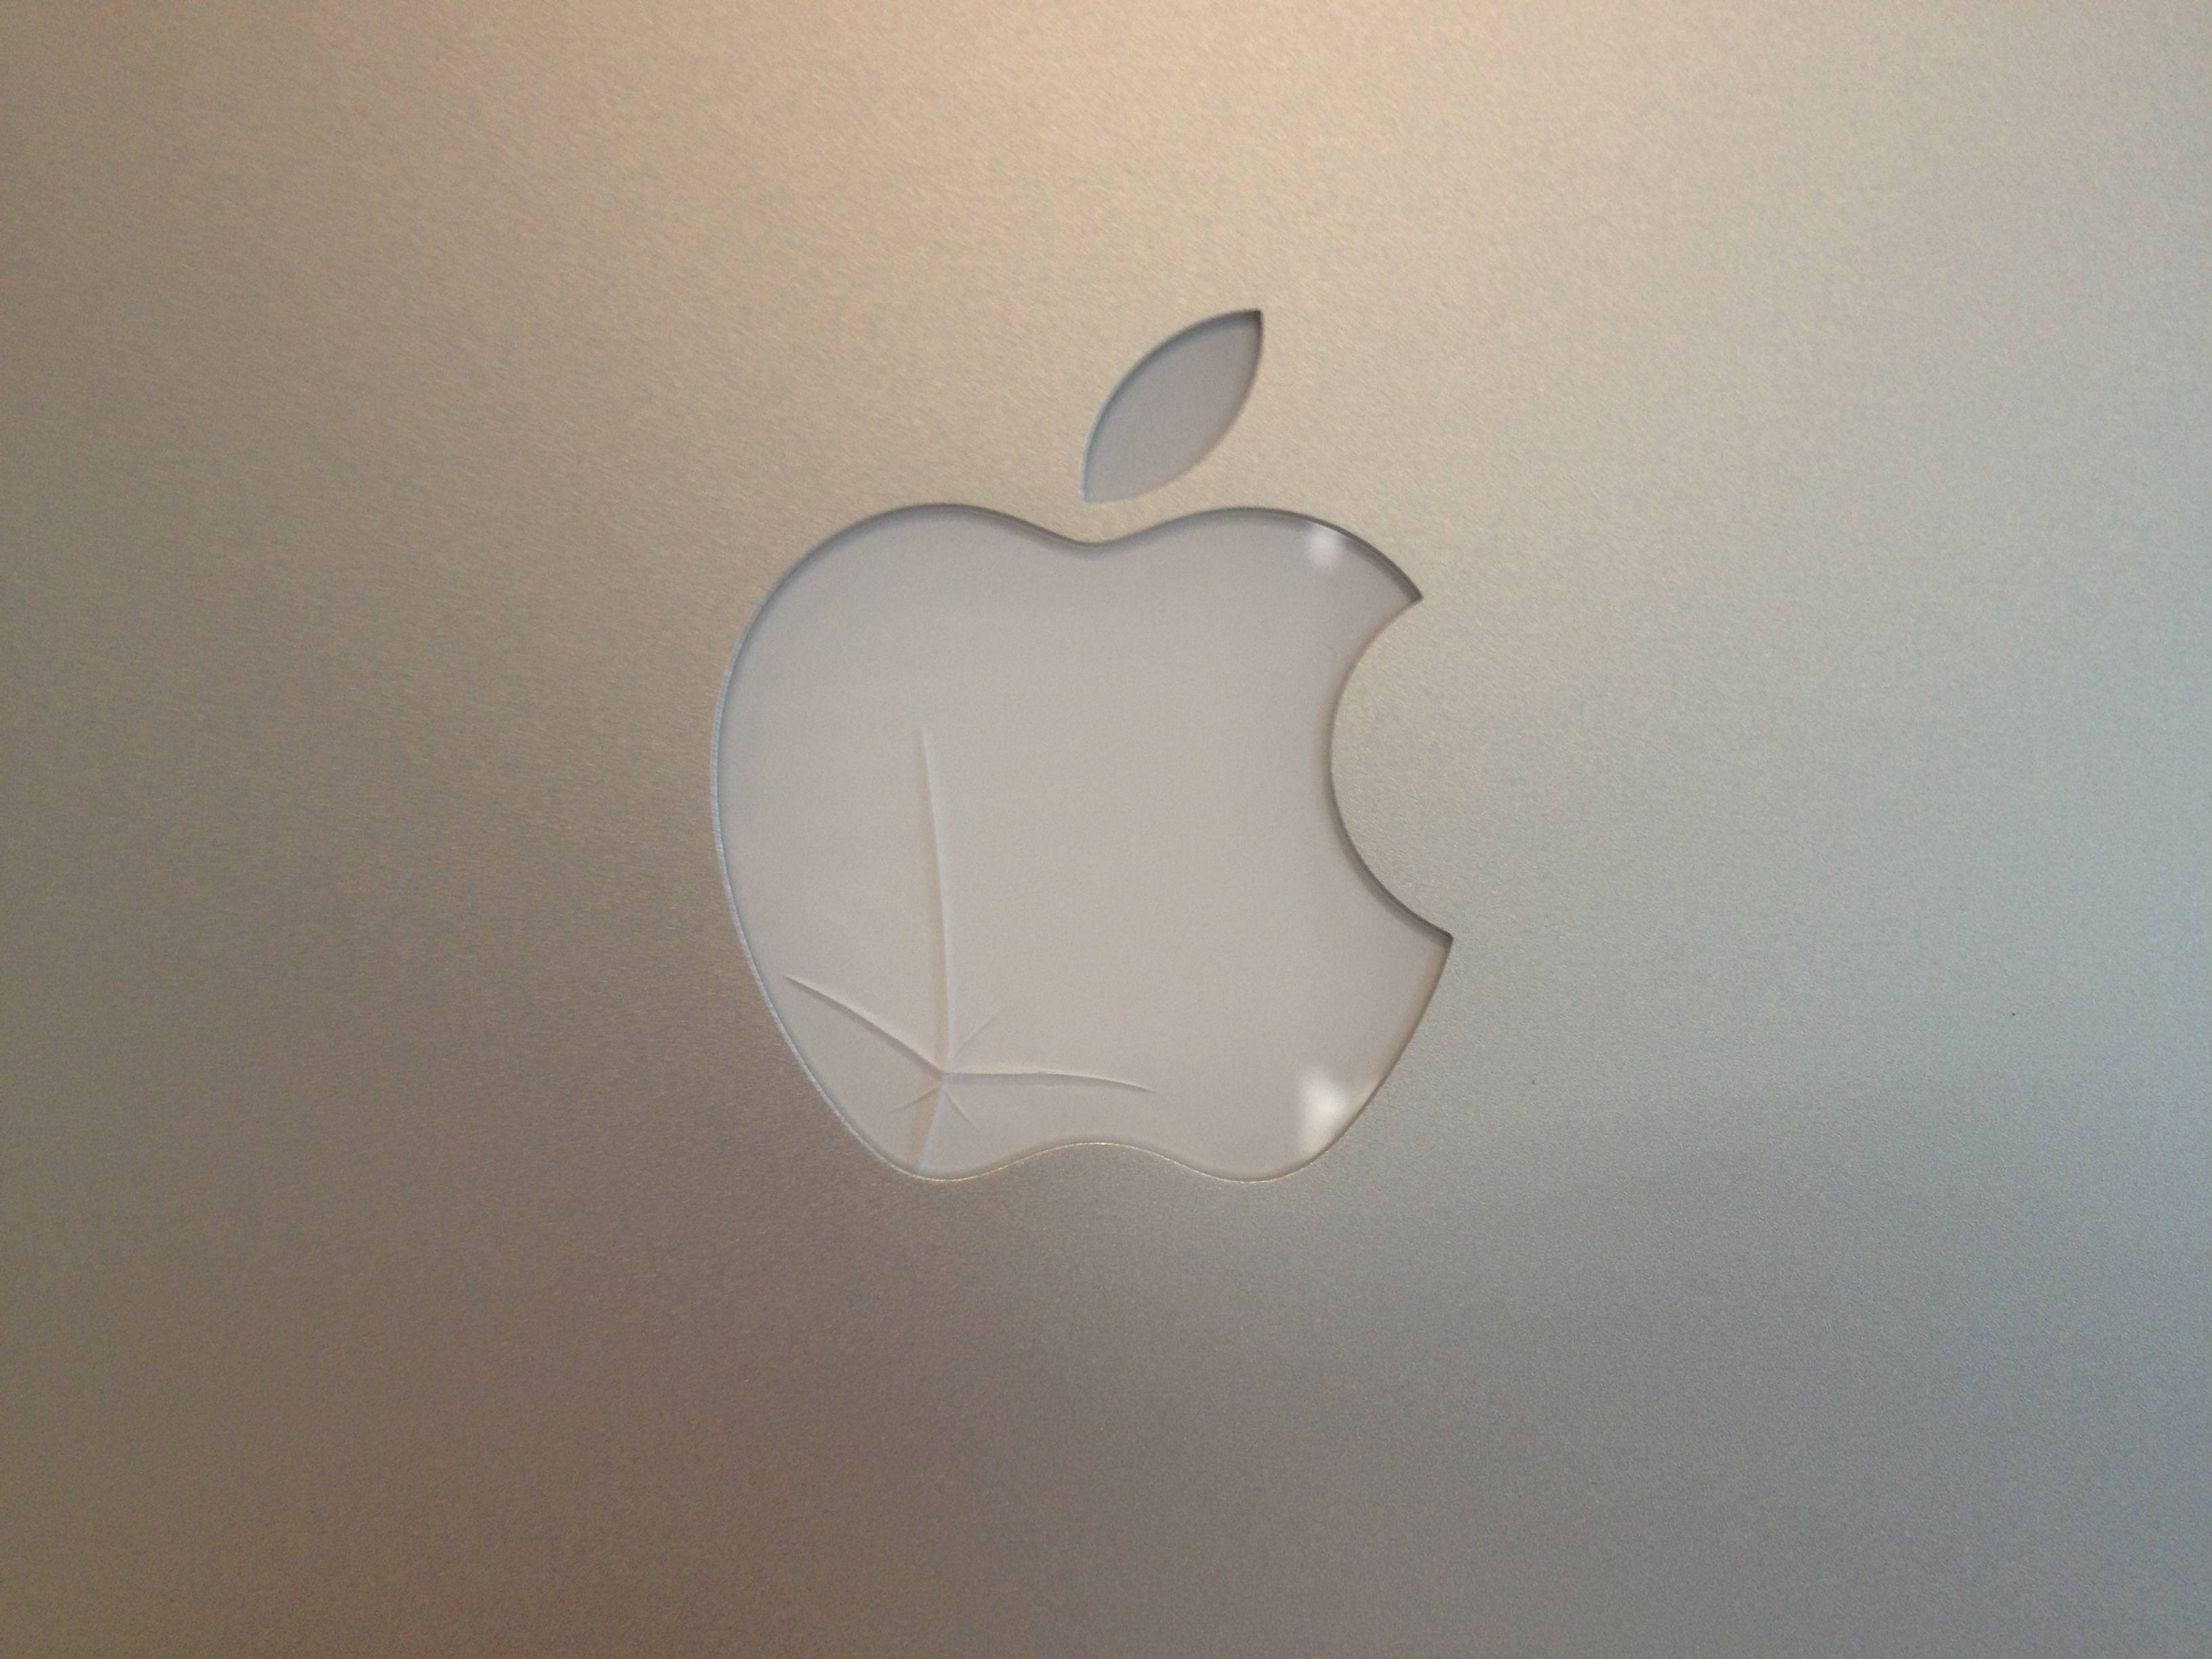 Different Apple Logo - The Apple light on my Macbook is damaged, could this damage the ...